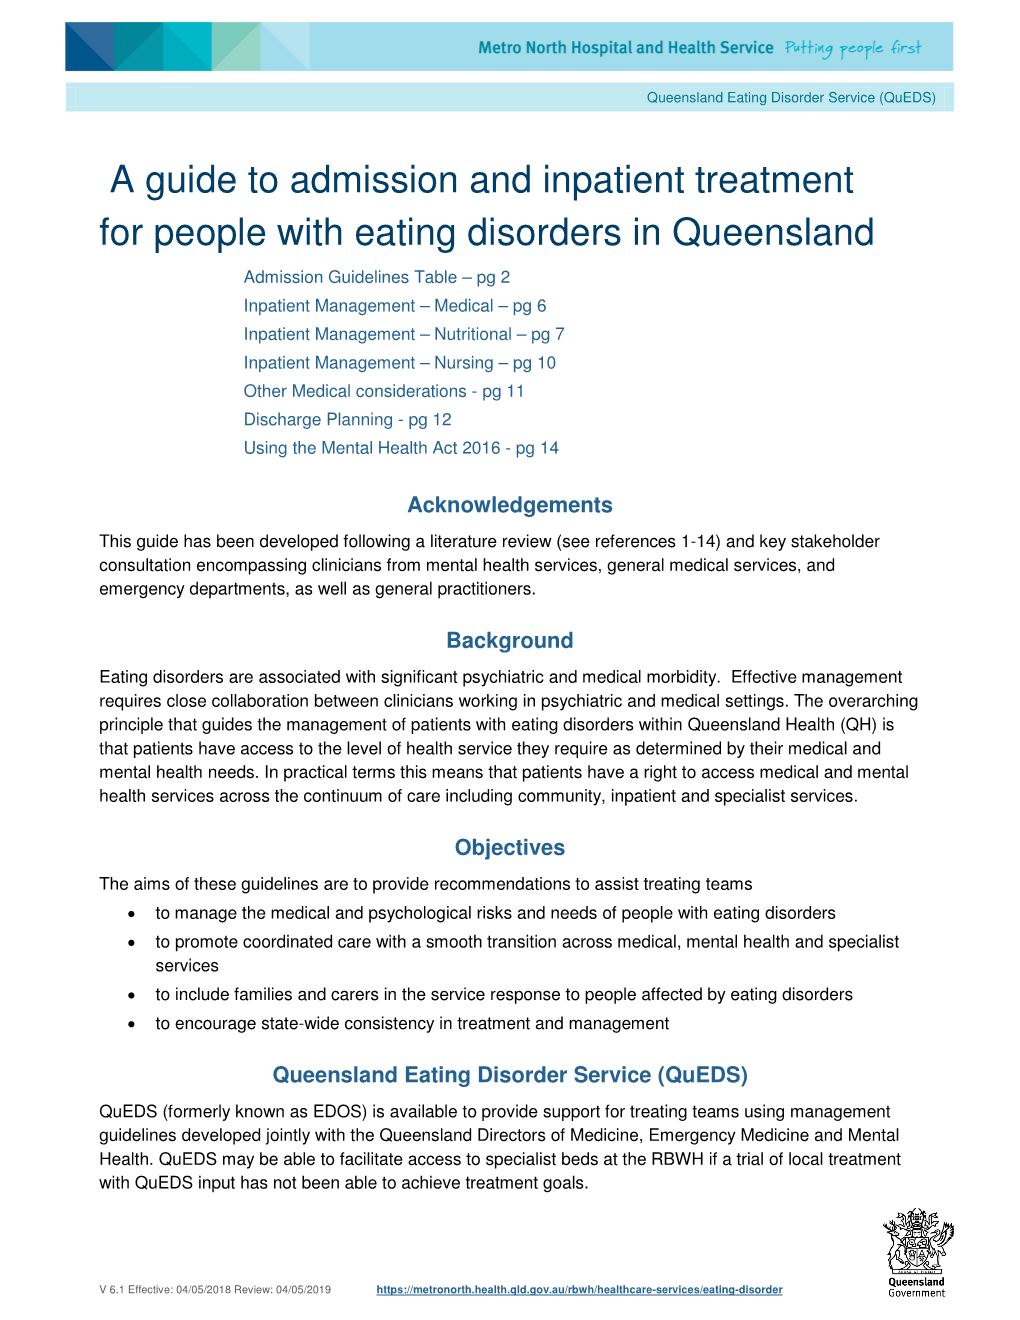 A Guide to Admission and Inpatient Treatment for People with Eating Disorders in Queensland